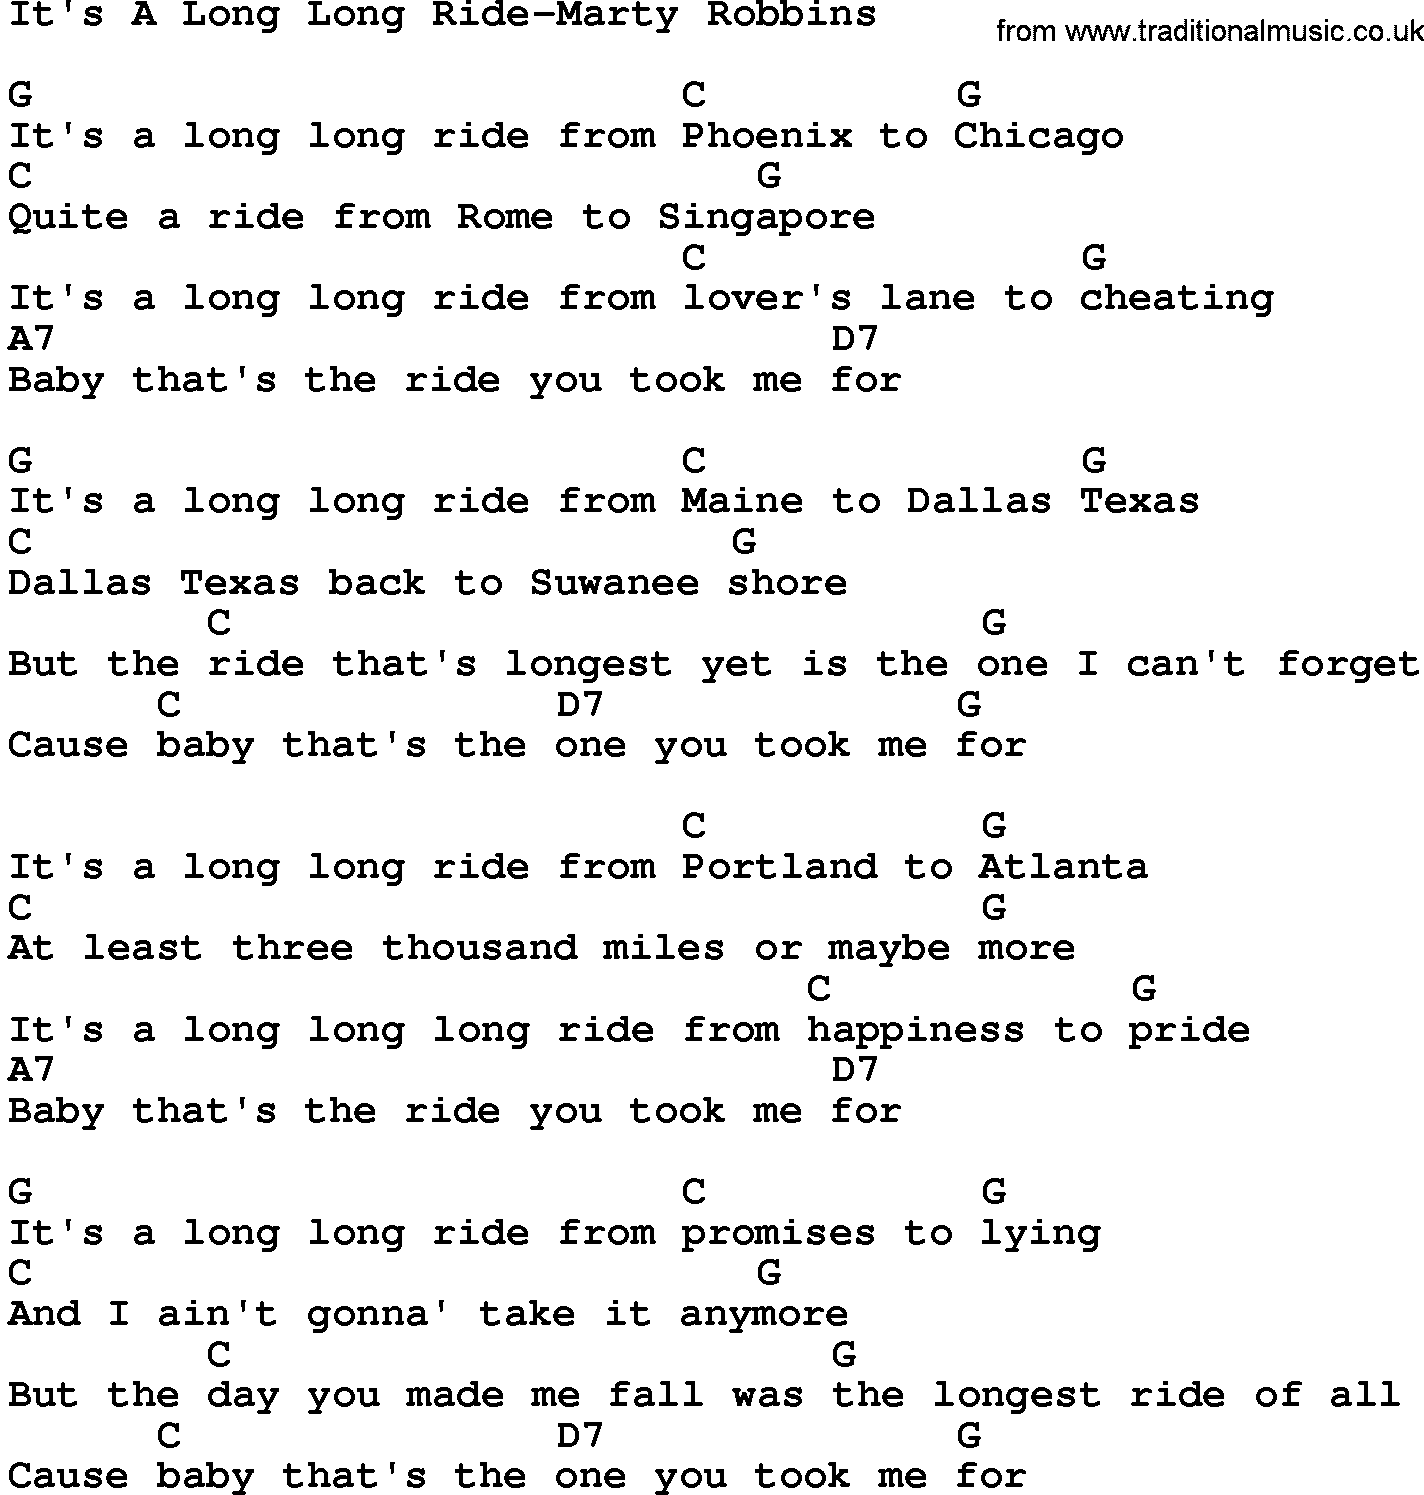 Country music song: It's A Long Long Ride-Marty Robbins lyrics and chords